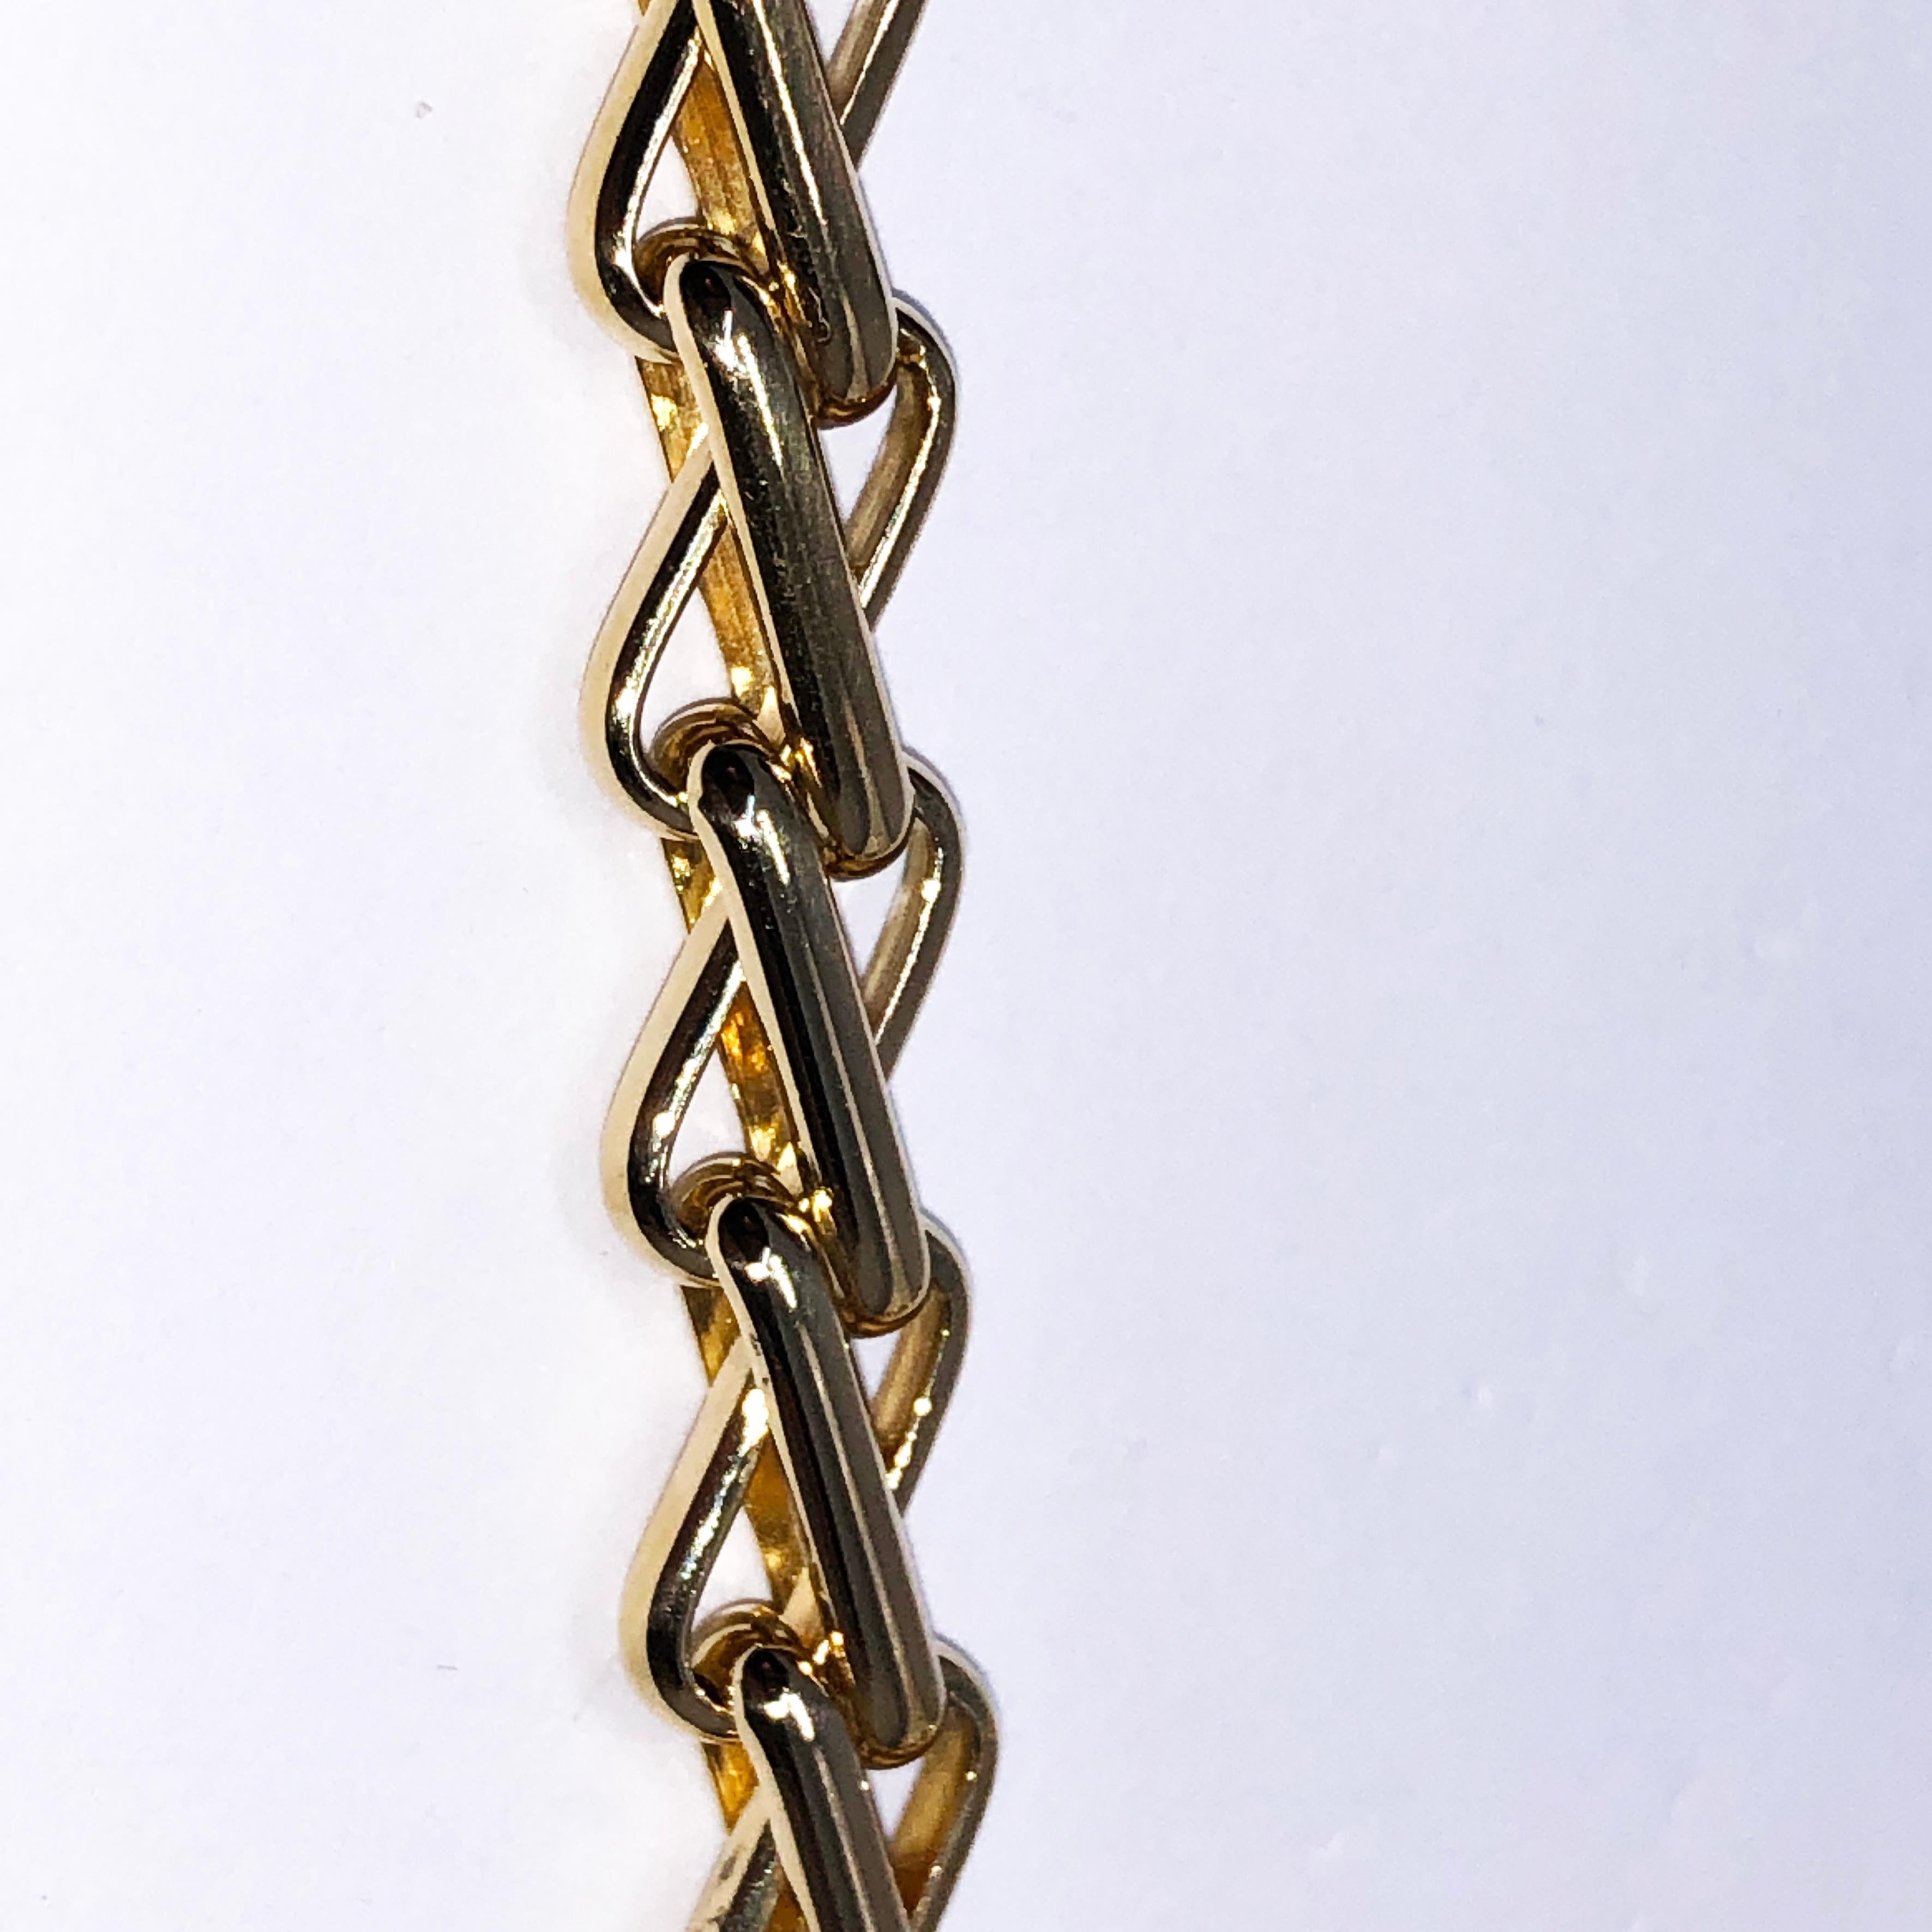 Original 1980 One-of-a-Kind Pomellato 18K Solid Yellow Gold Long Chain Necklace 1